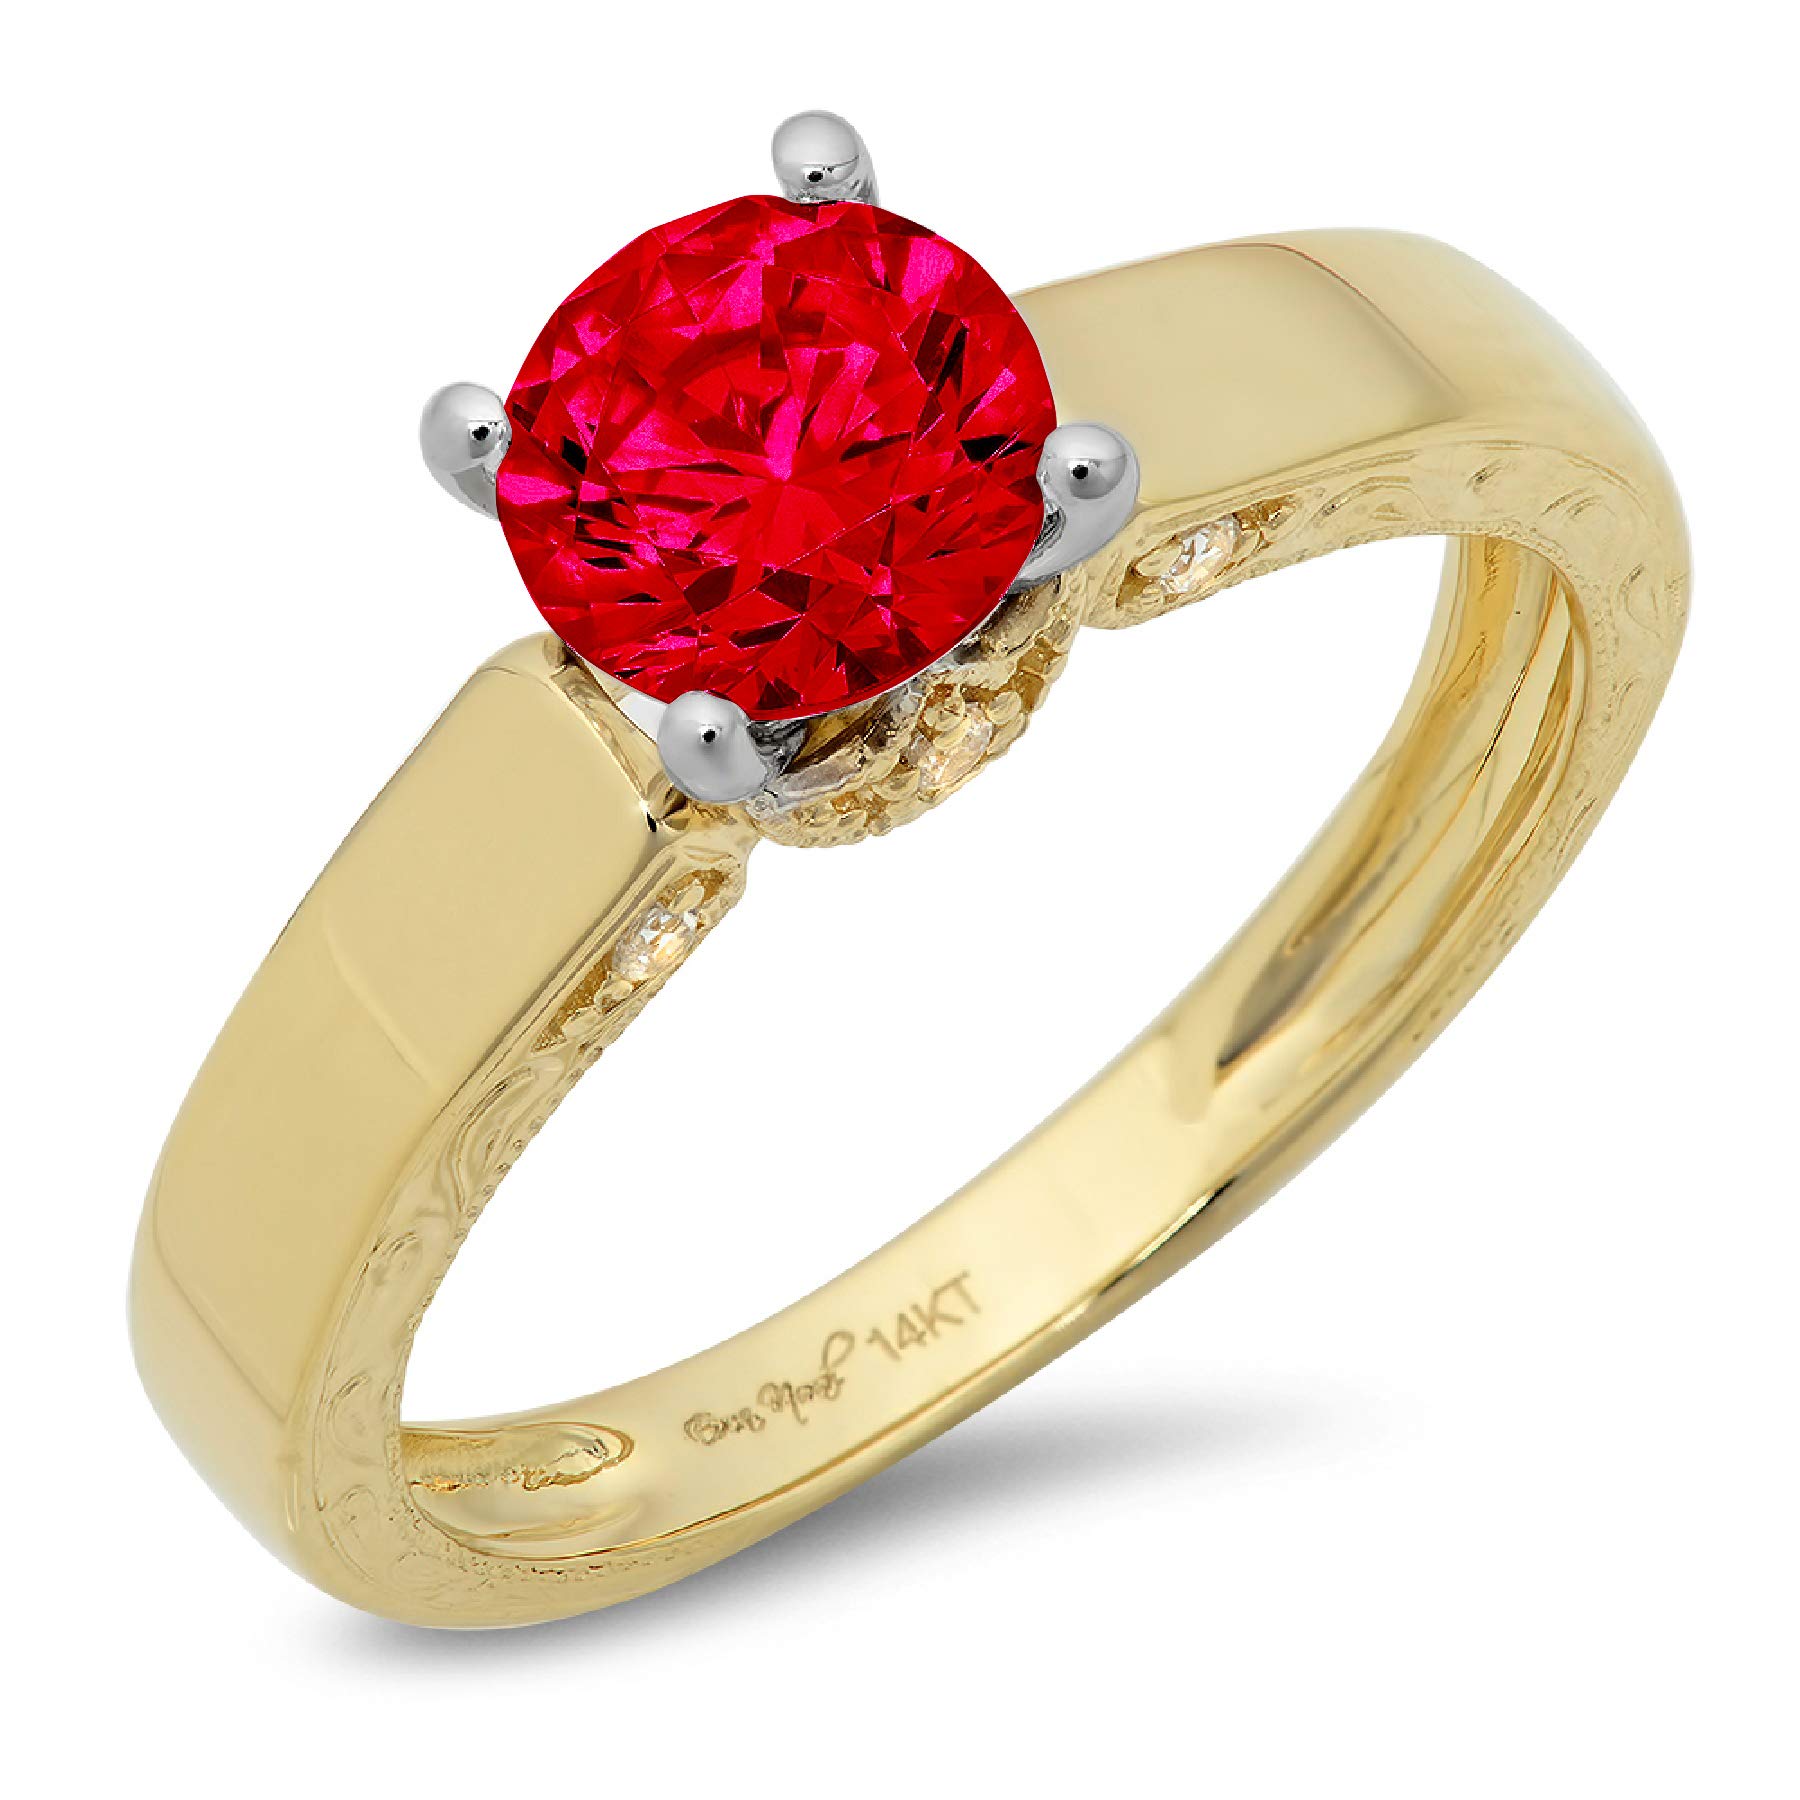 Clara Pucci 1.67ct Brilliant Round Cut Solitaire Flawless Simulated CZ Red Ruby VVS1 Designer Modern Statement with accent Ring Solid 14k 2 tone Gold